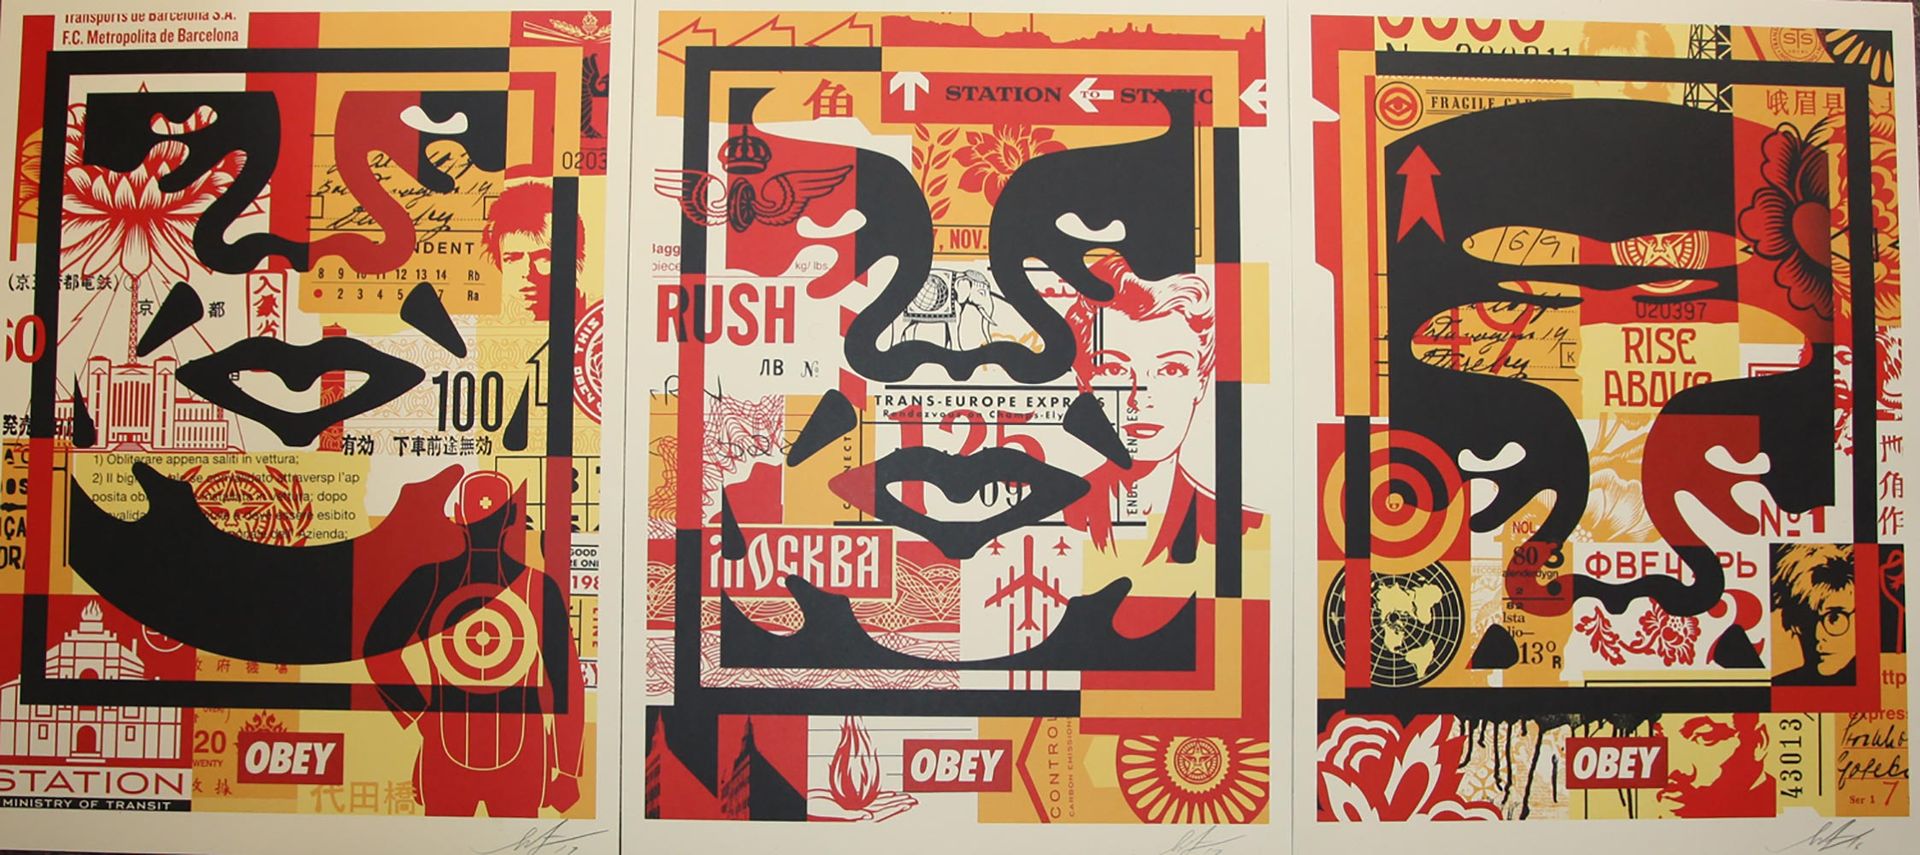 Shepard FAIREY Shepard Fairey (OBEY) - Obey 3 Face Collage

Offset Lithographs o&hellip;